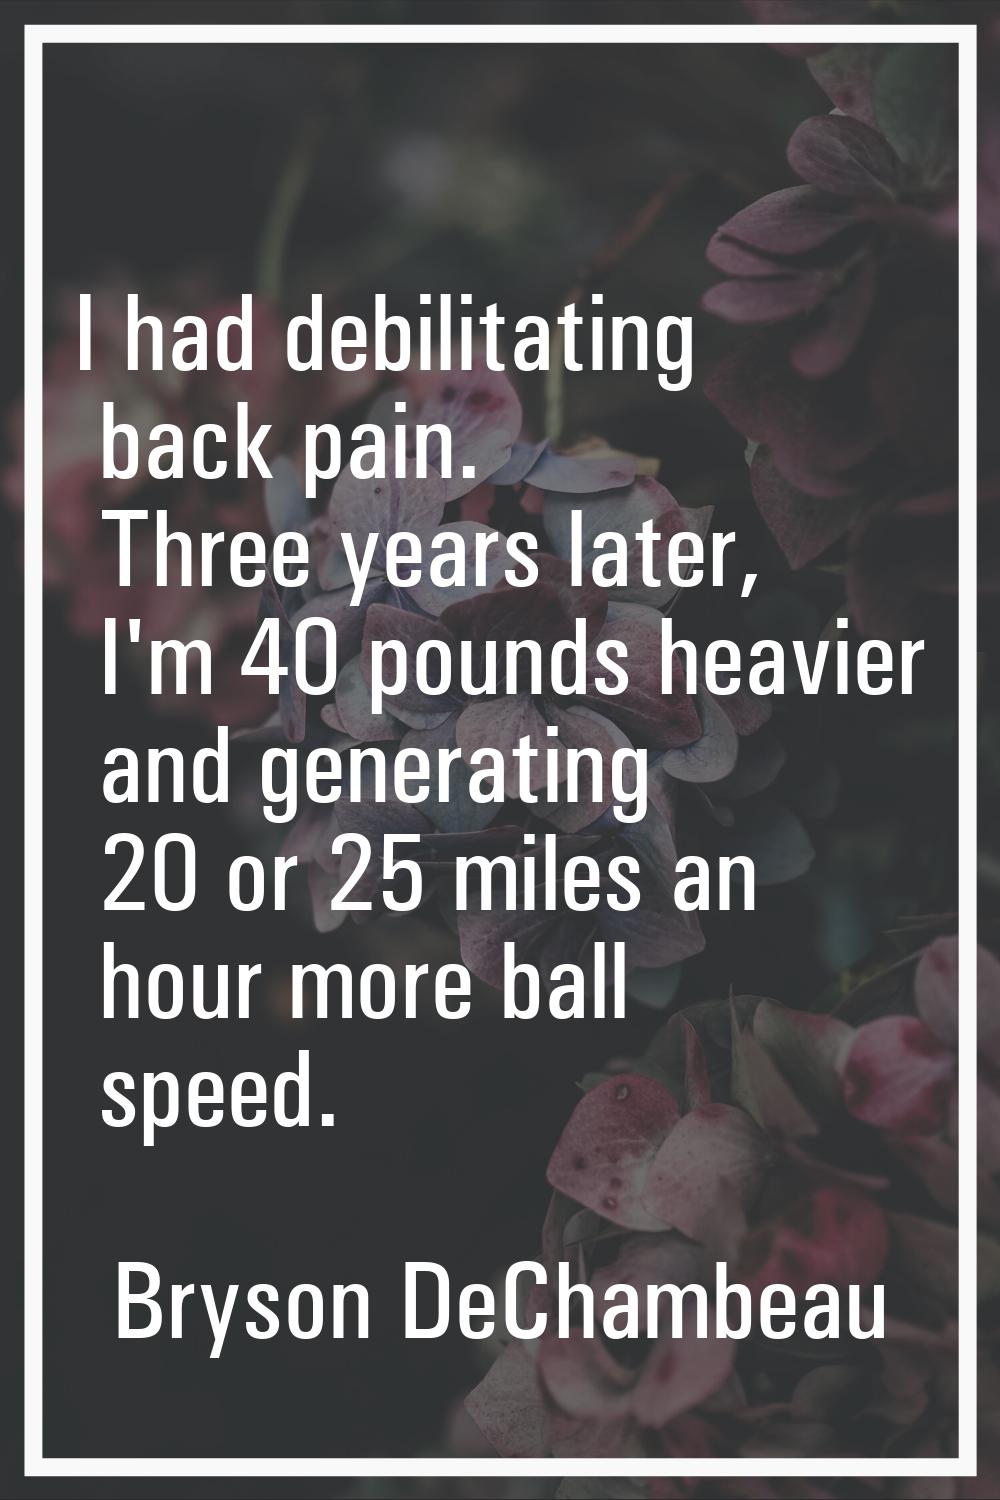 I had debilitating back pain. Three years later, I'm 40 pounds heavier and generating 20 or 25 mile